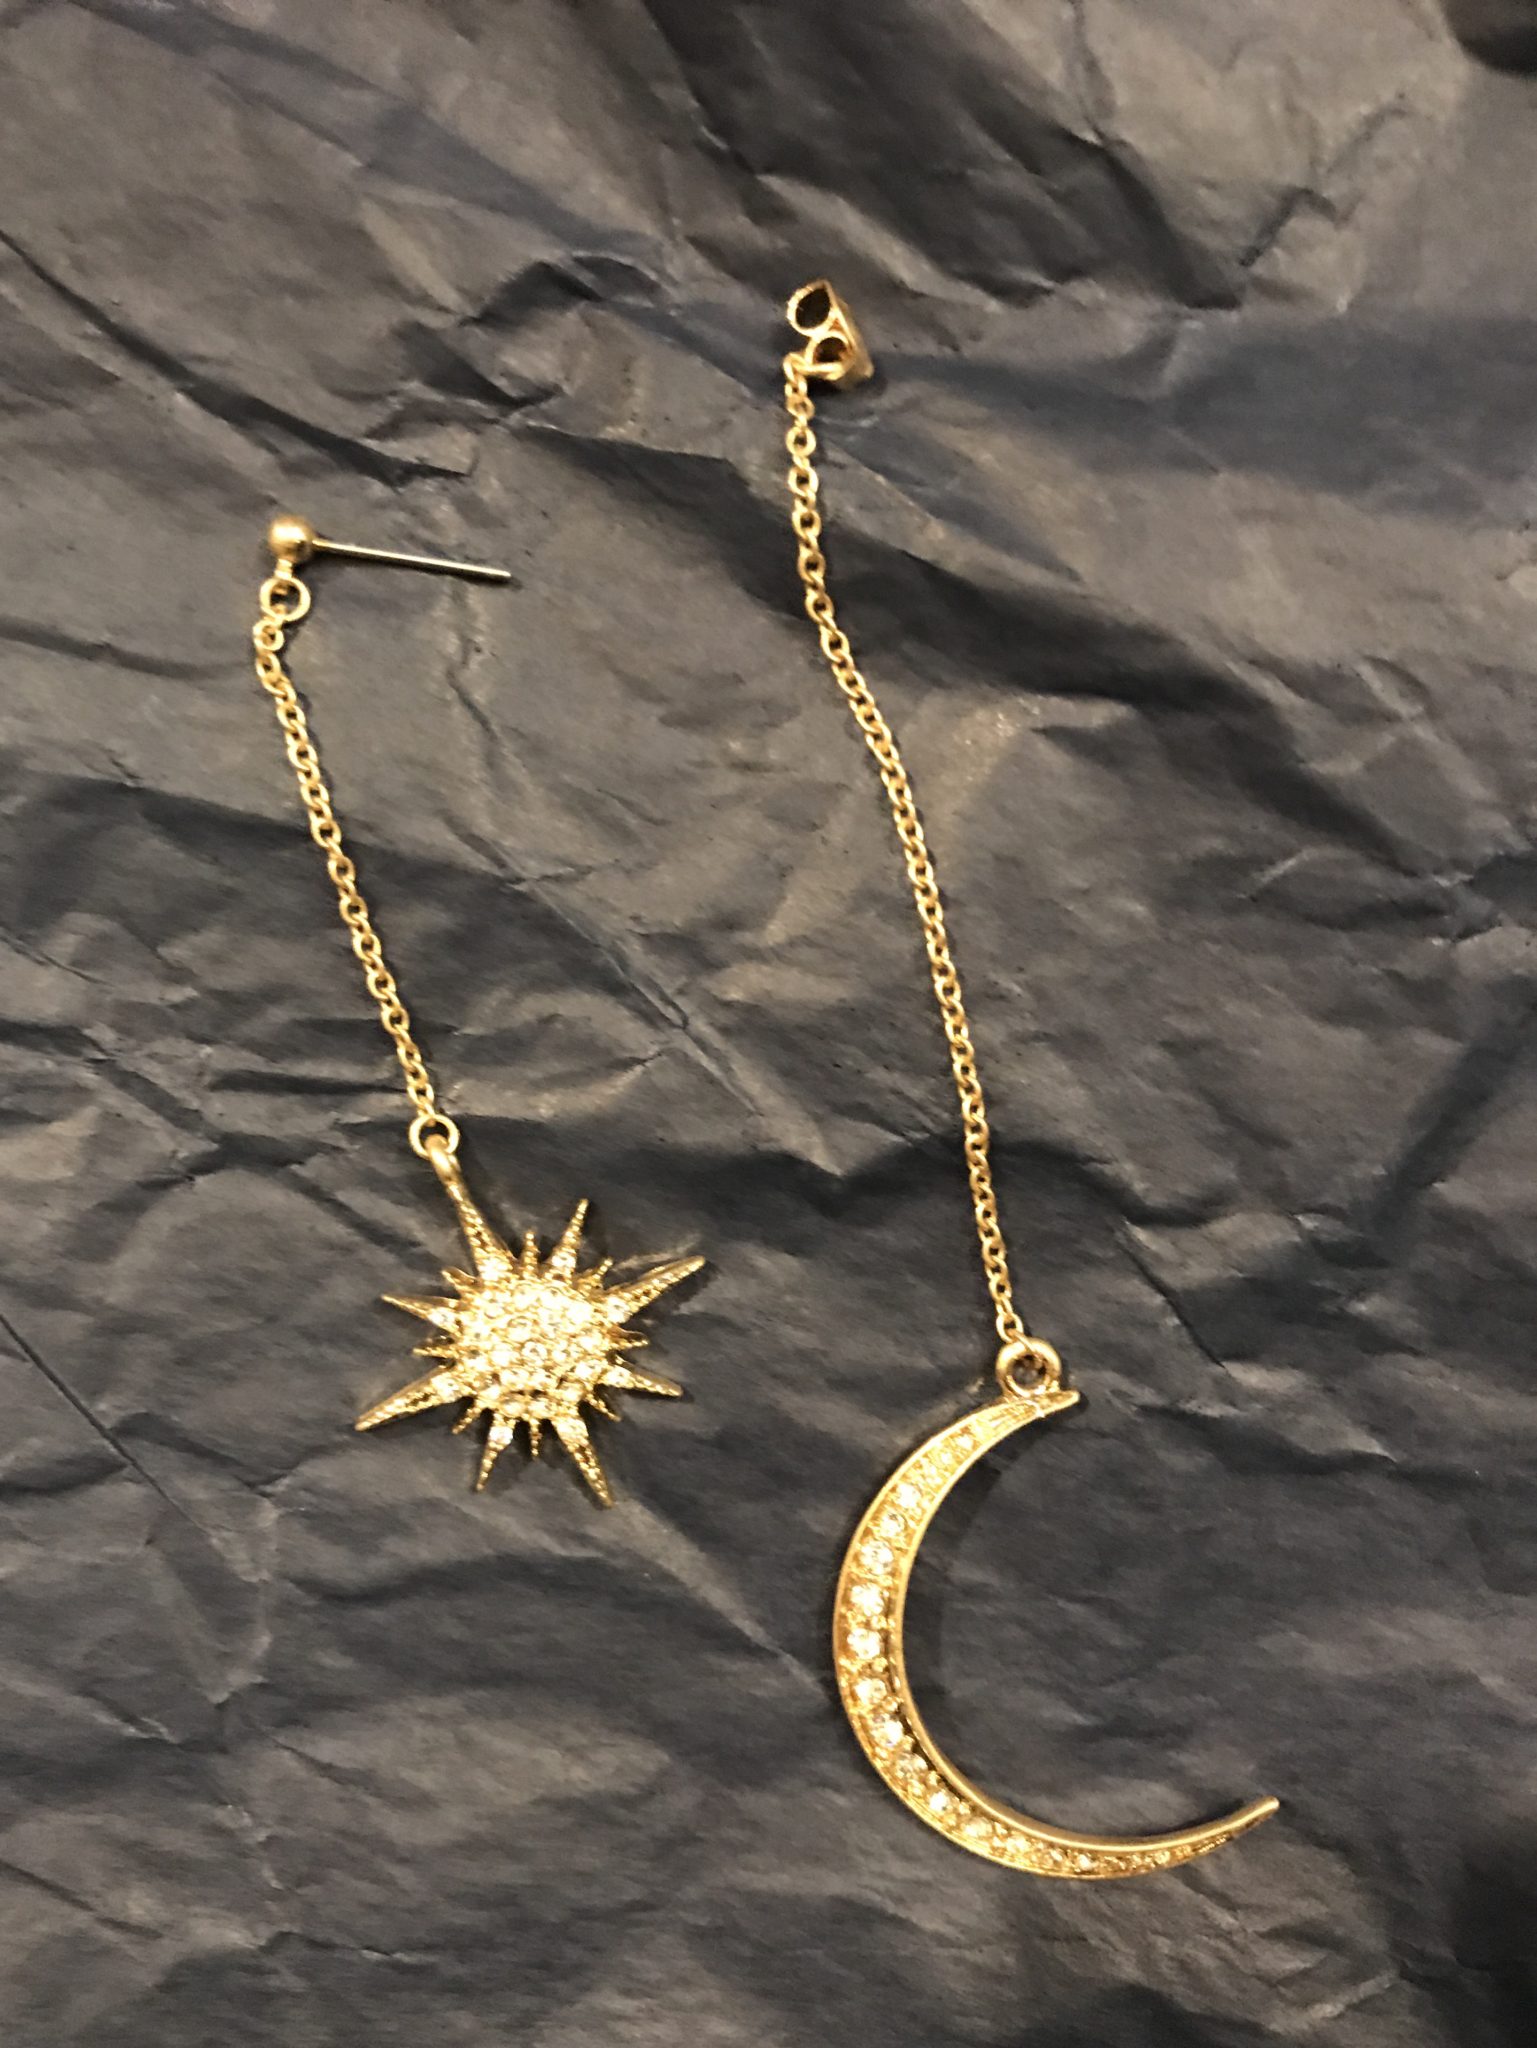 the two parts of the Lahaina star and moon earring, each dangling on a golden chain